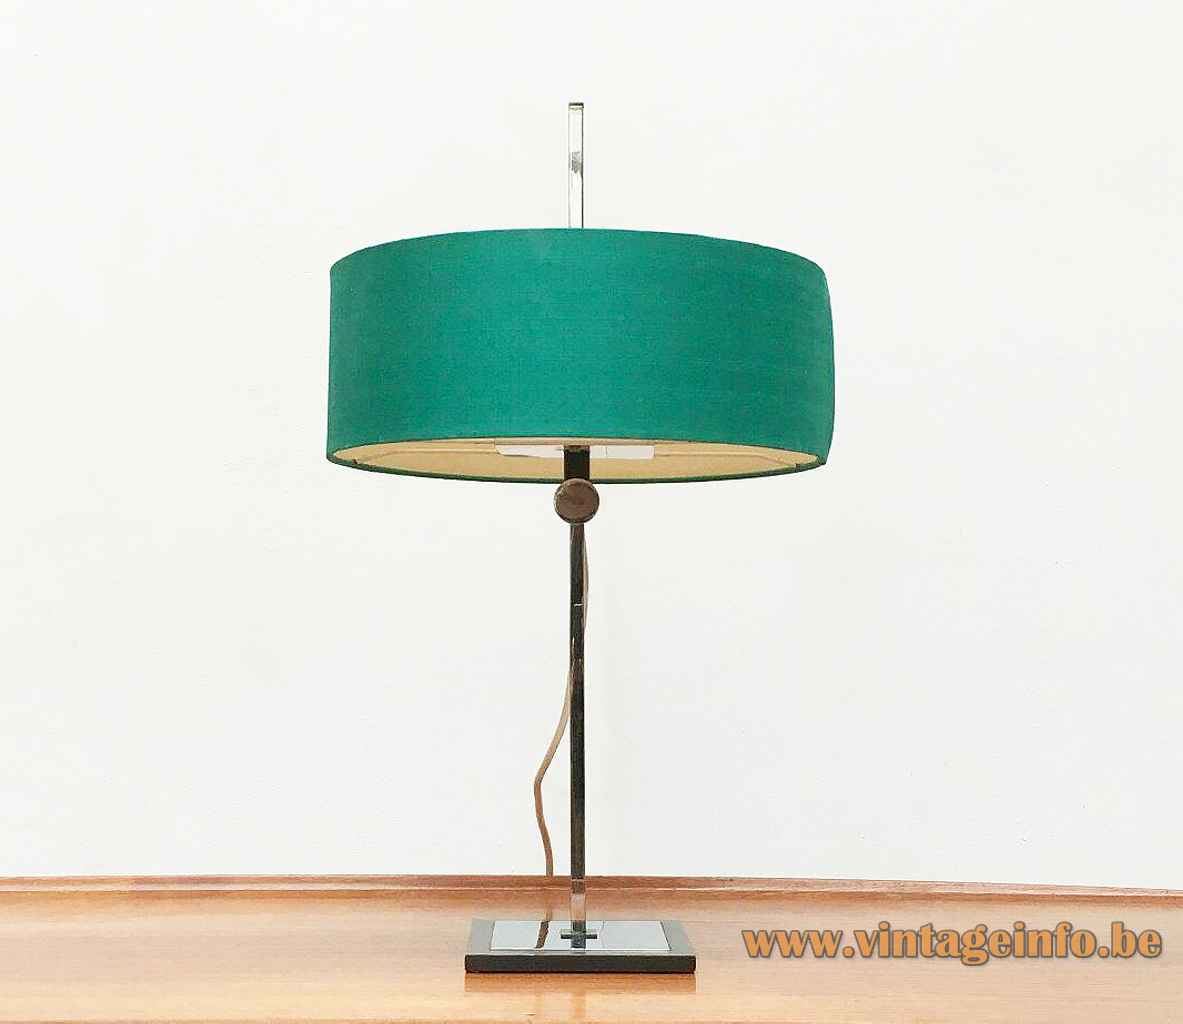 Kaiser Leuchten adjustable table lamp 45167 square chrome base & rod round turquoise fabric lampshade 1970s Germany